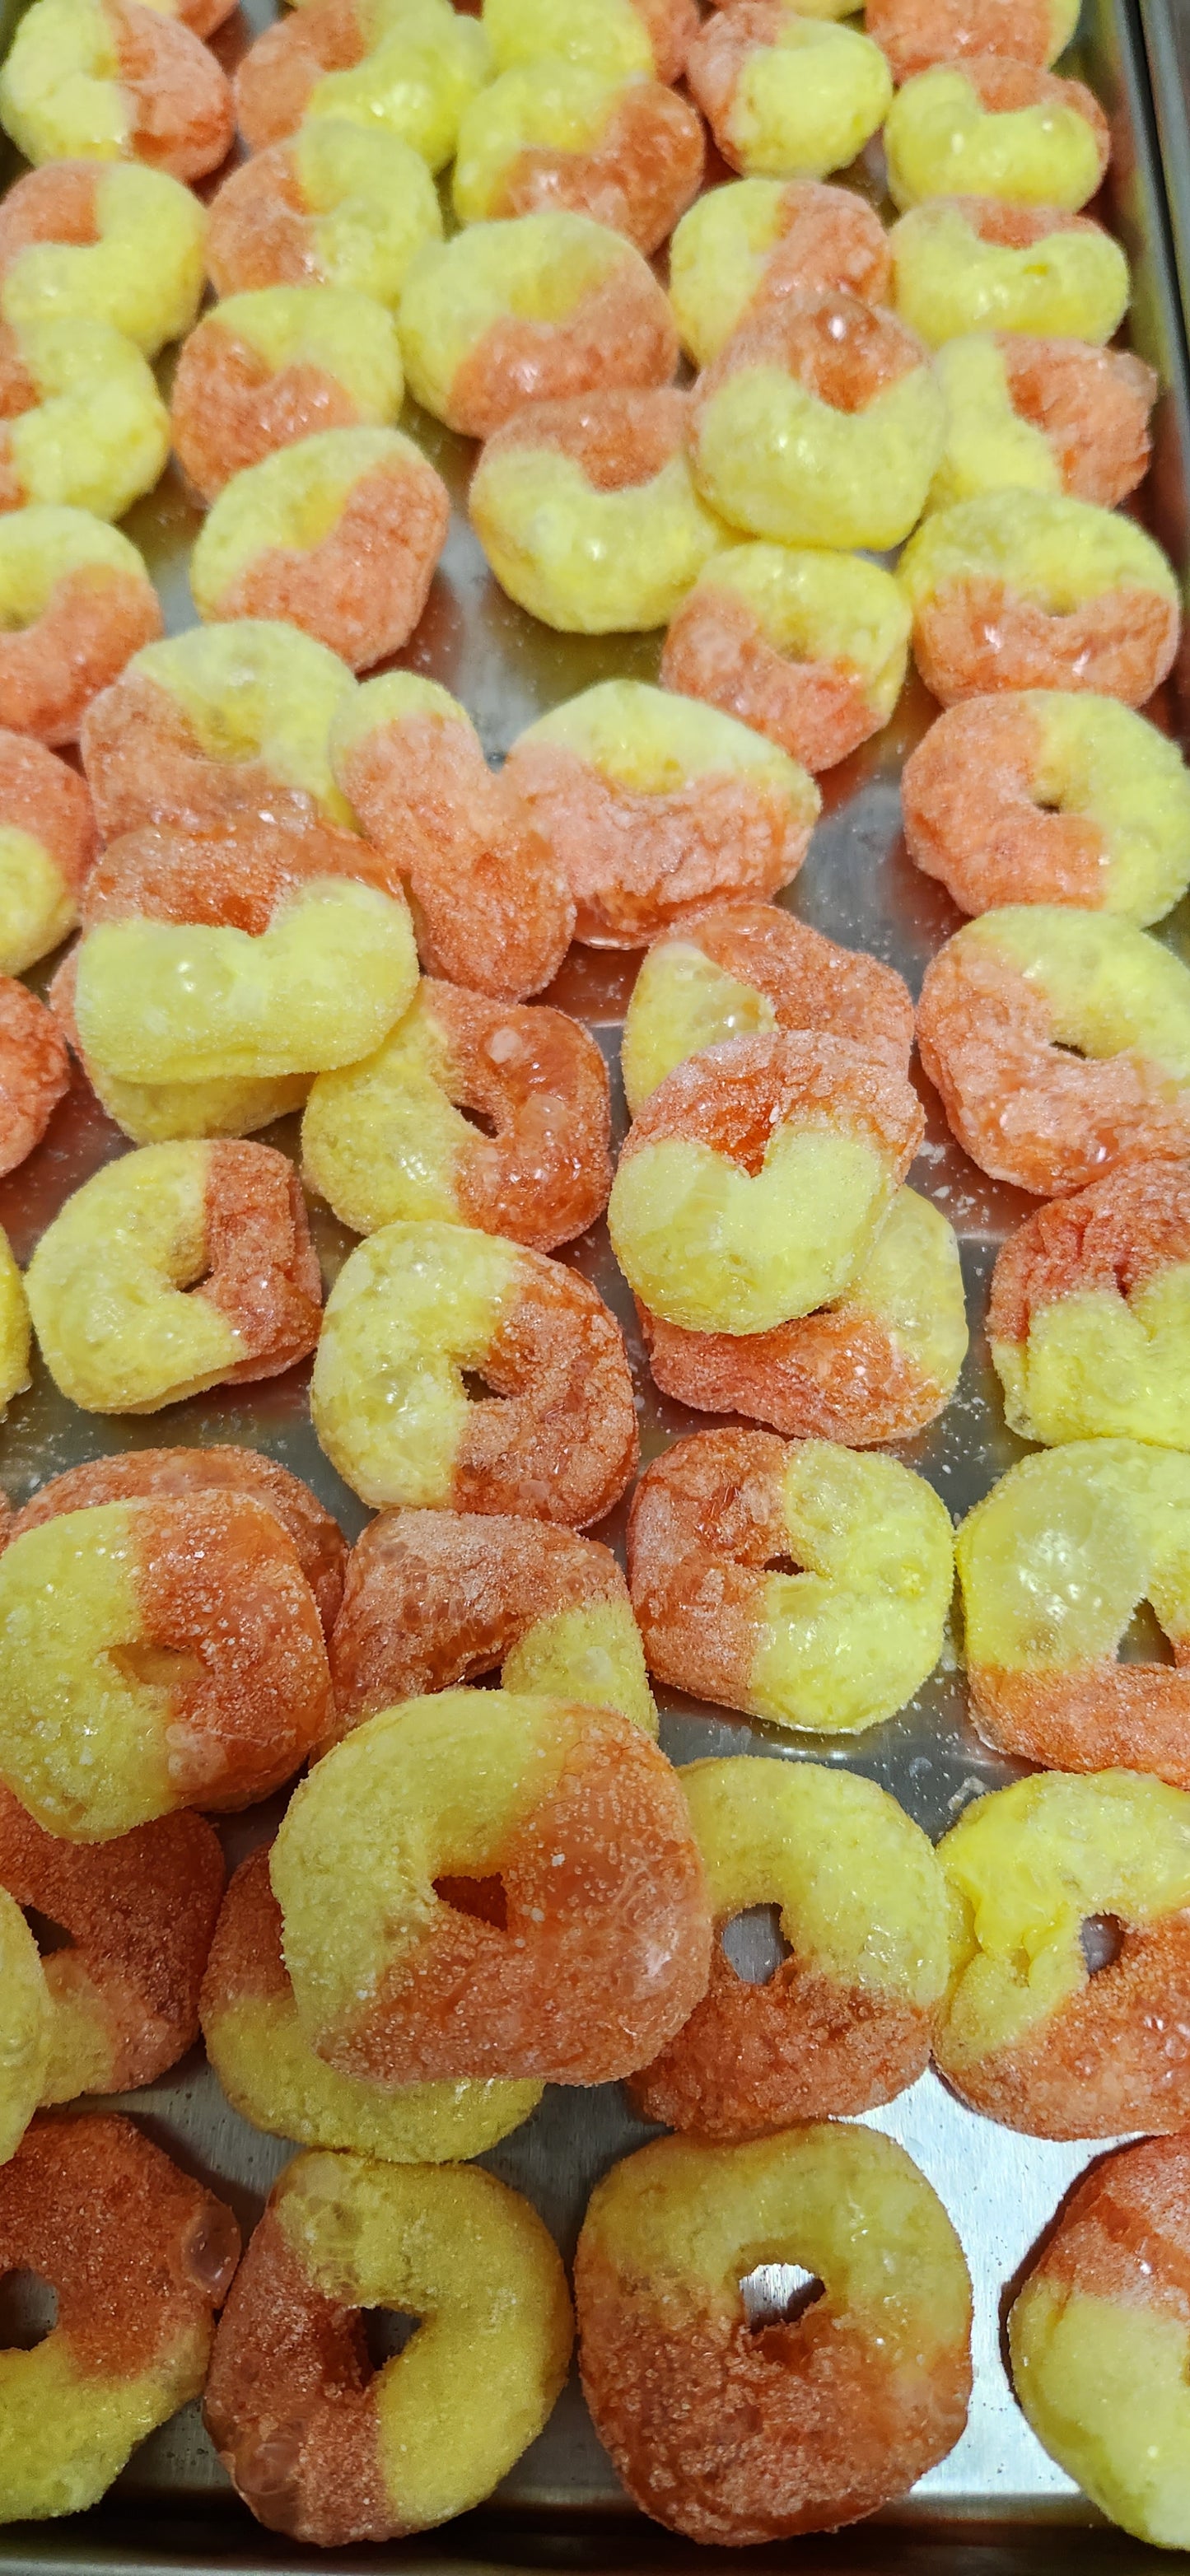 Freeze Dried Gummy Peach Rings coming out of the Freeze Dryer. Ready for snacking!